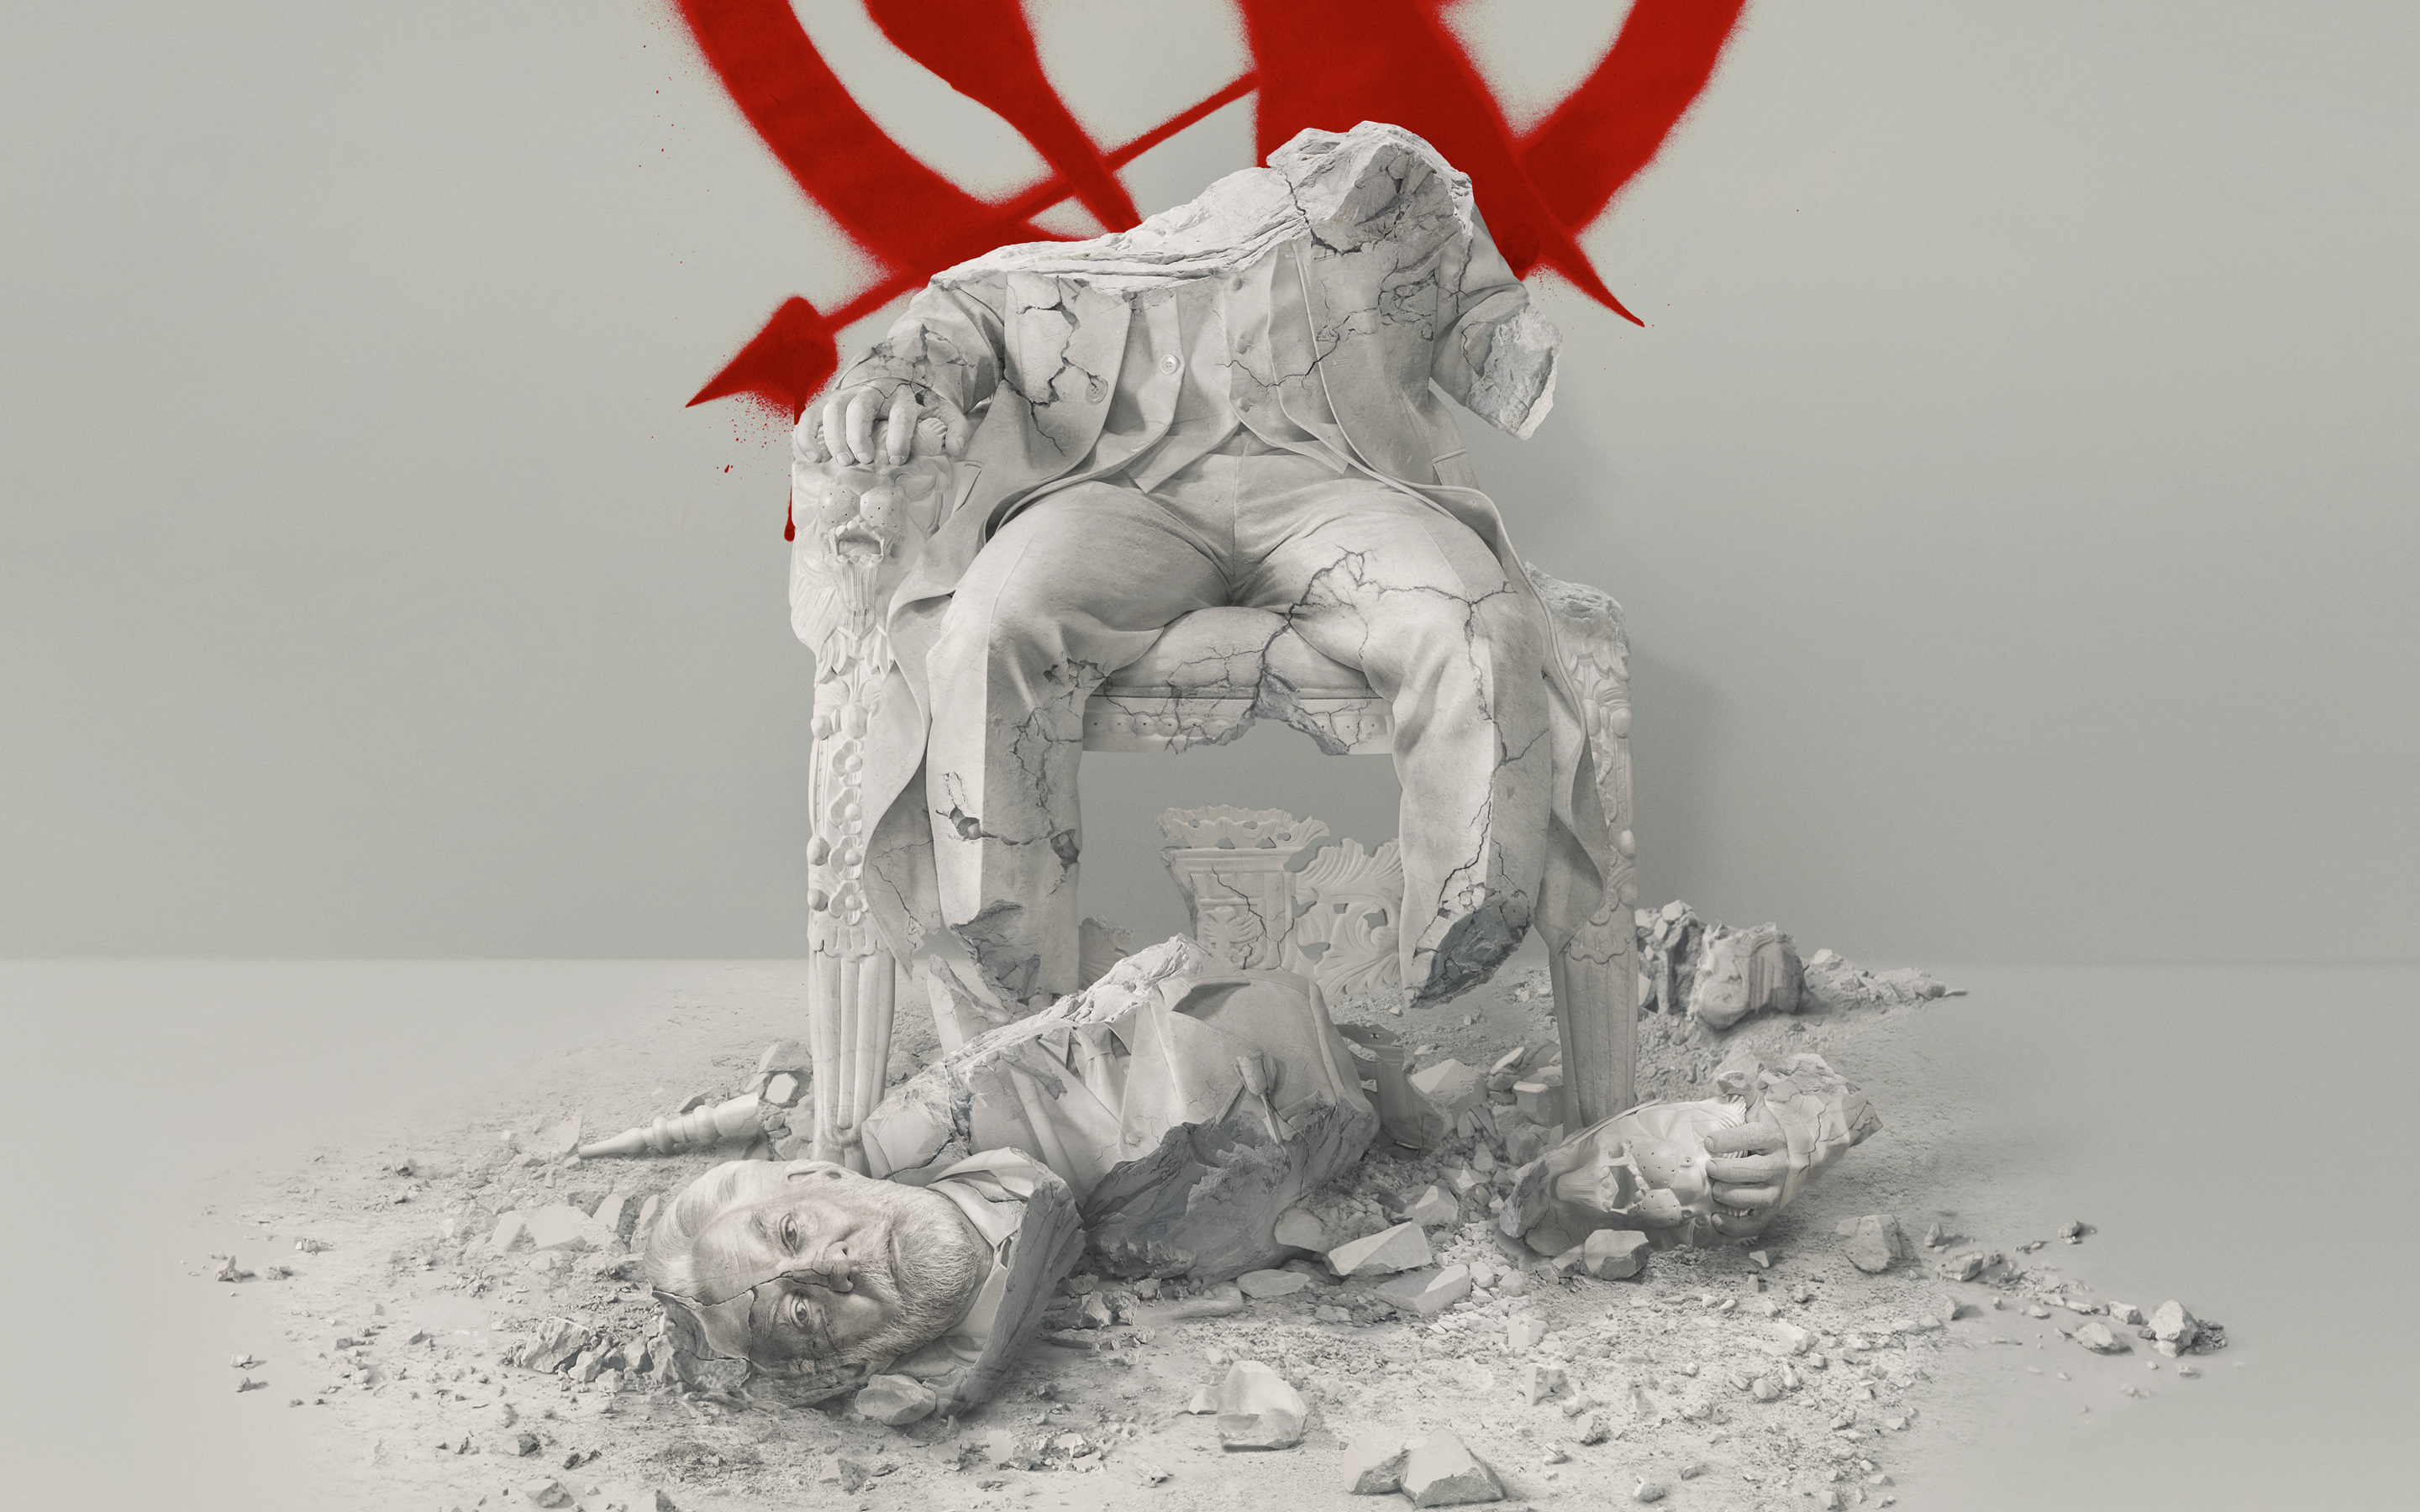 Hunger Games Mockingjay Part 2 2015 Wallpapers HD Wallpapers